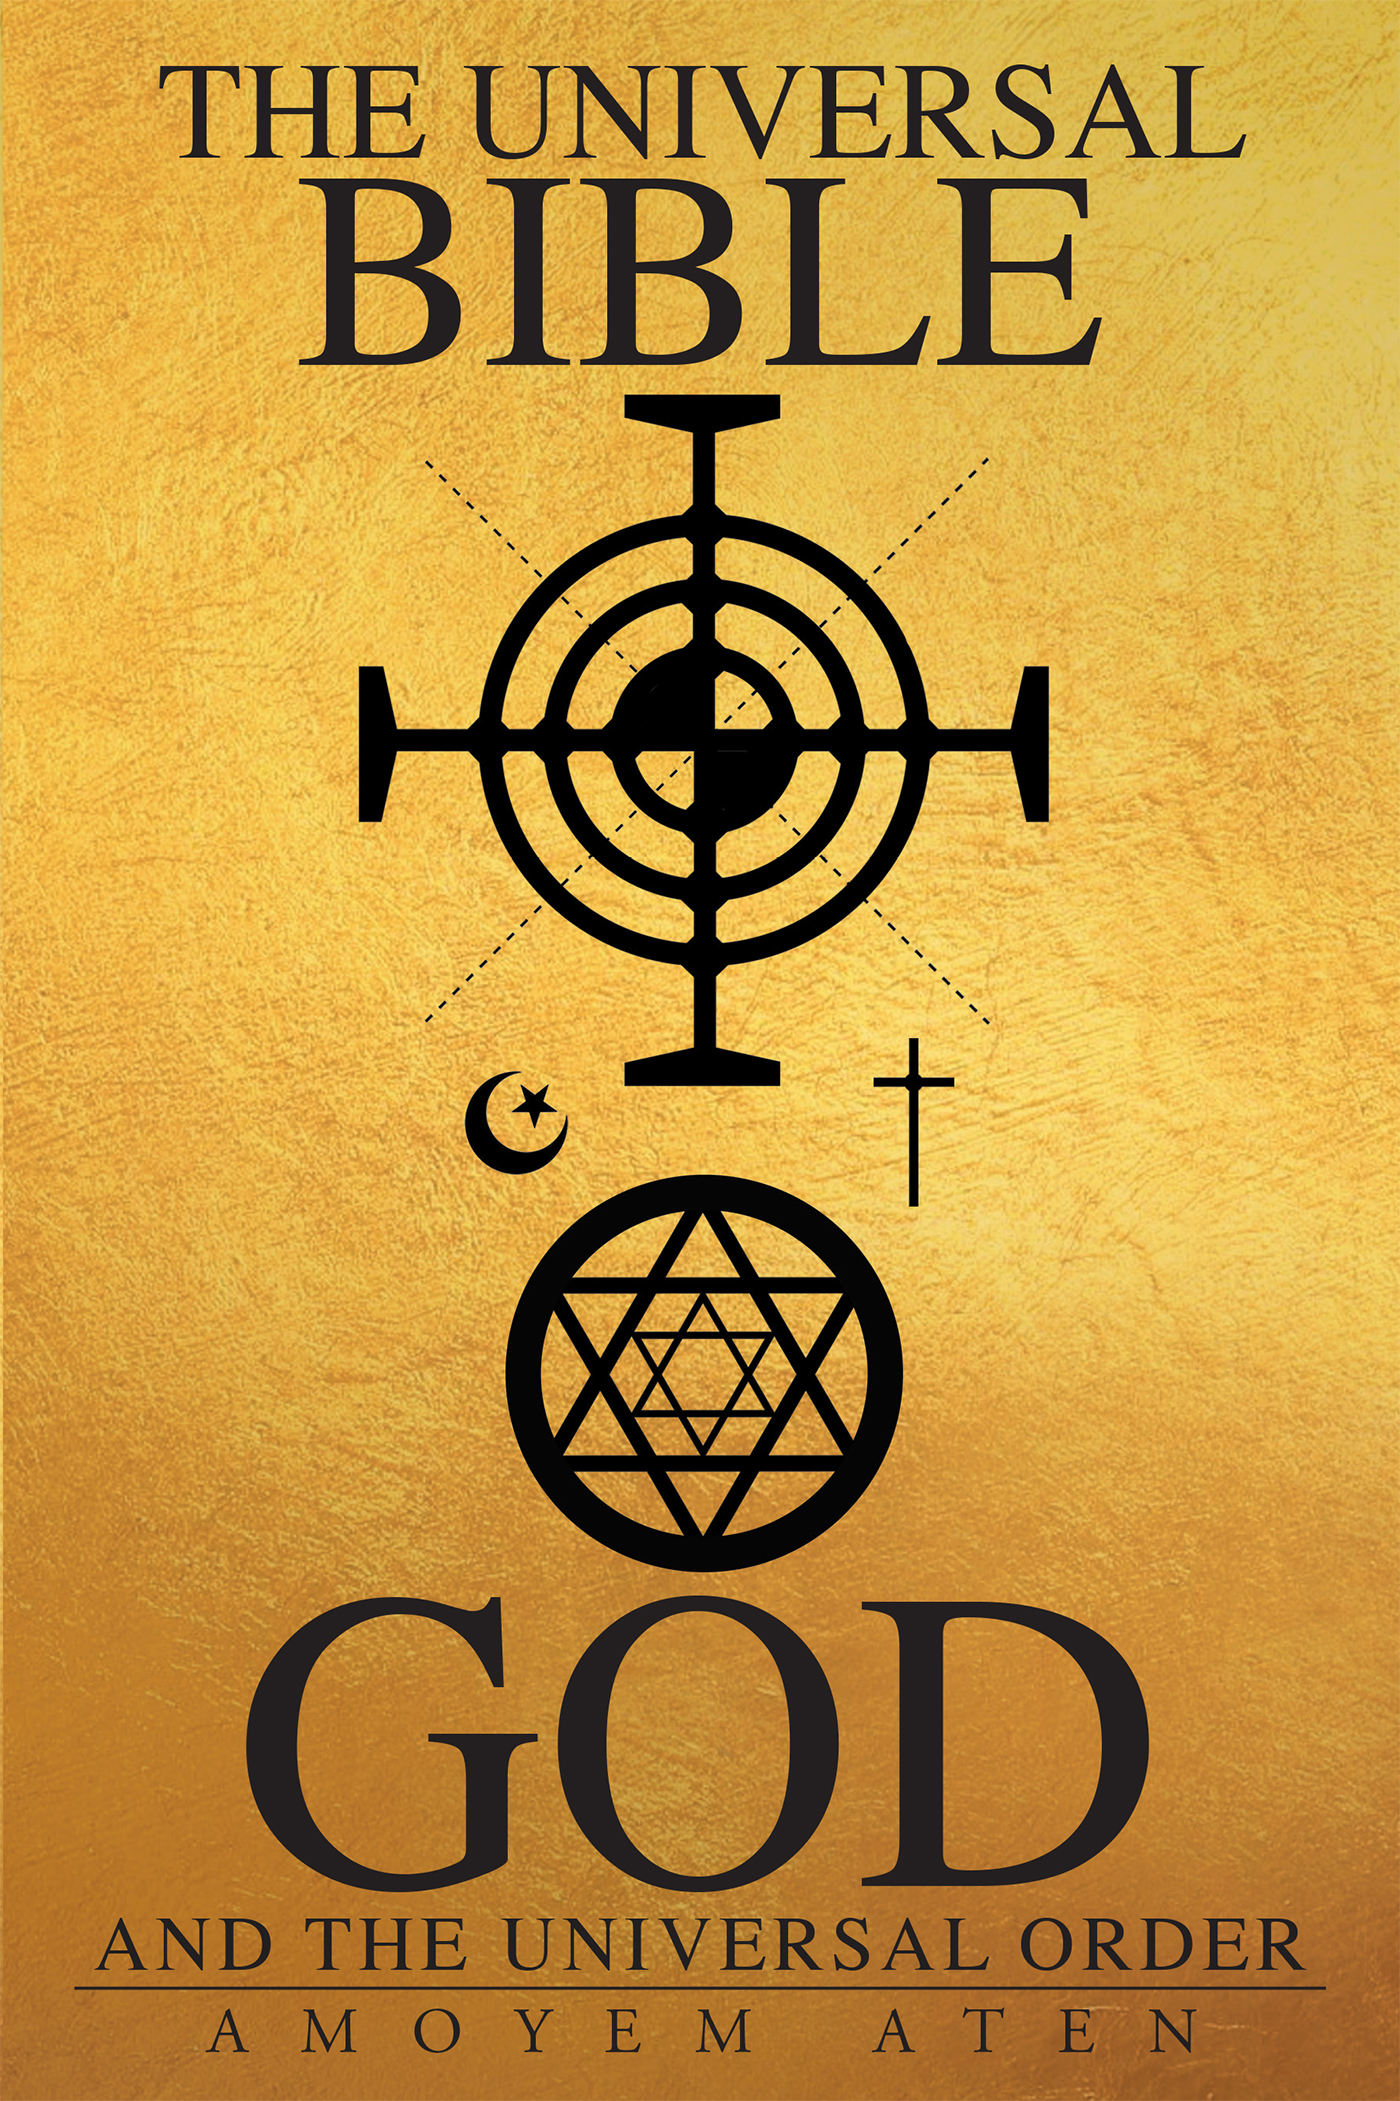 The Universal Bible, God, and the Universal Order Cover Image